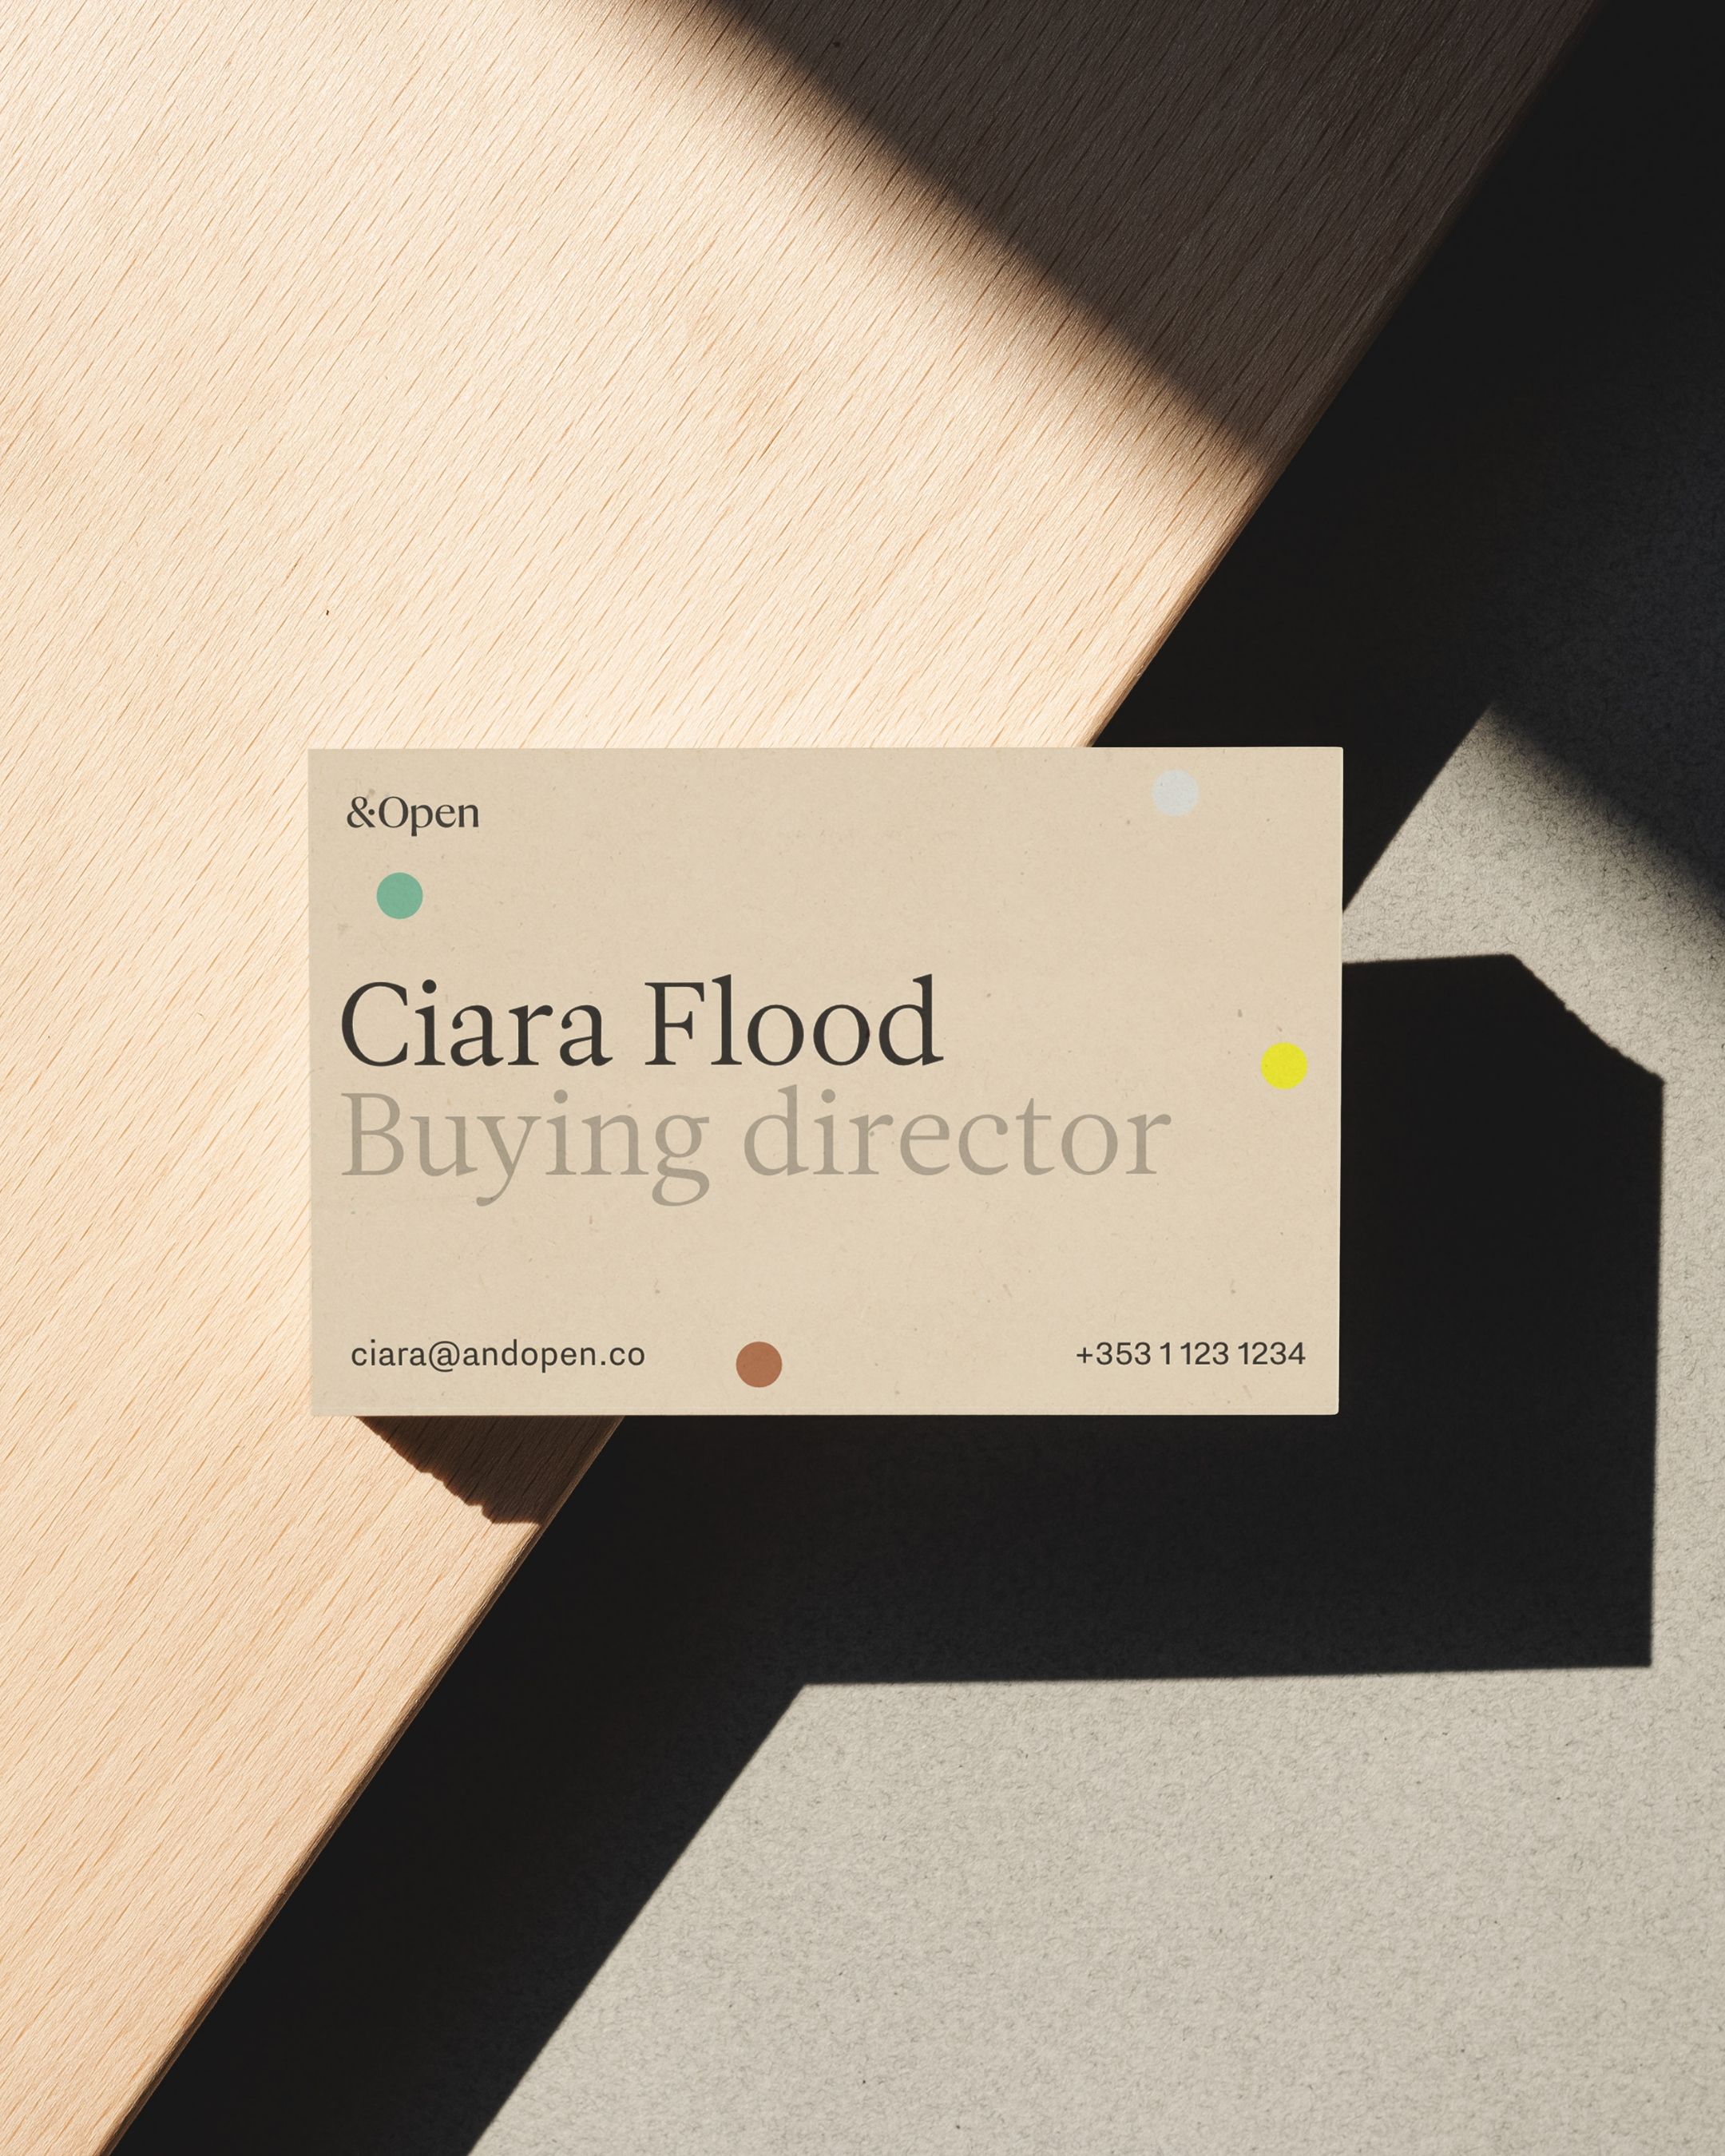 Business card on wooden table